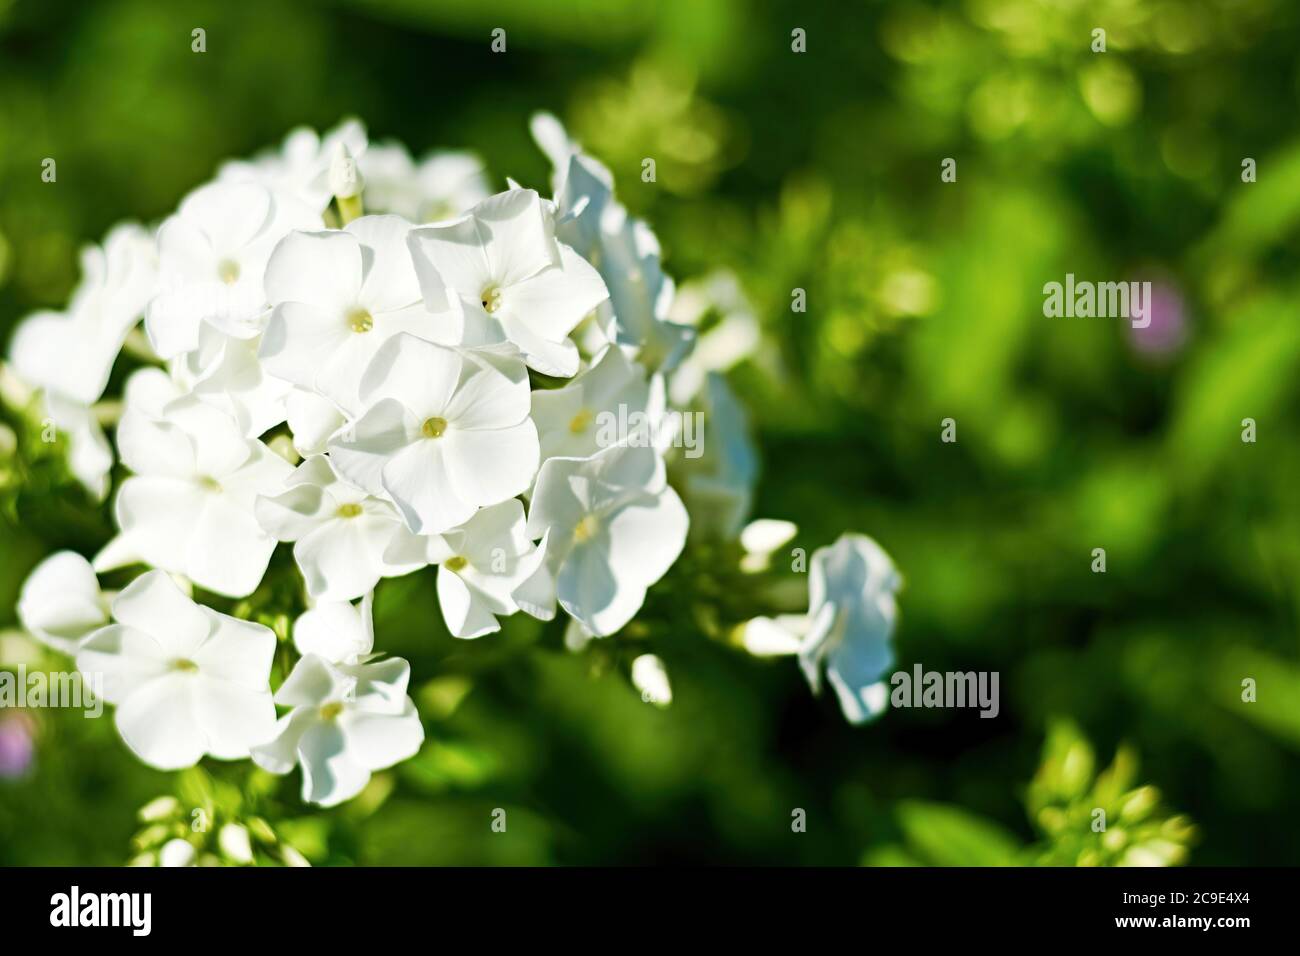 White phlox flower petals on the blurred green background. Floral backdrops and patterns with copy space for text Stock Photo